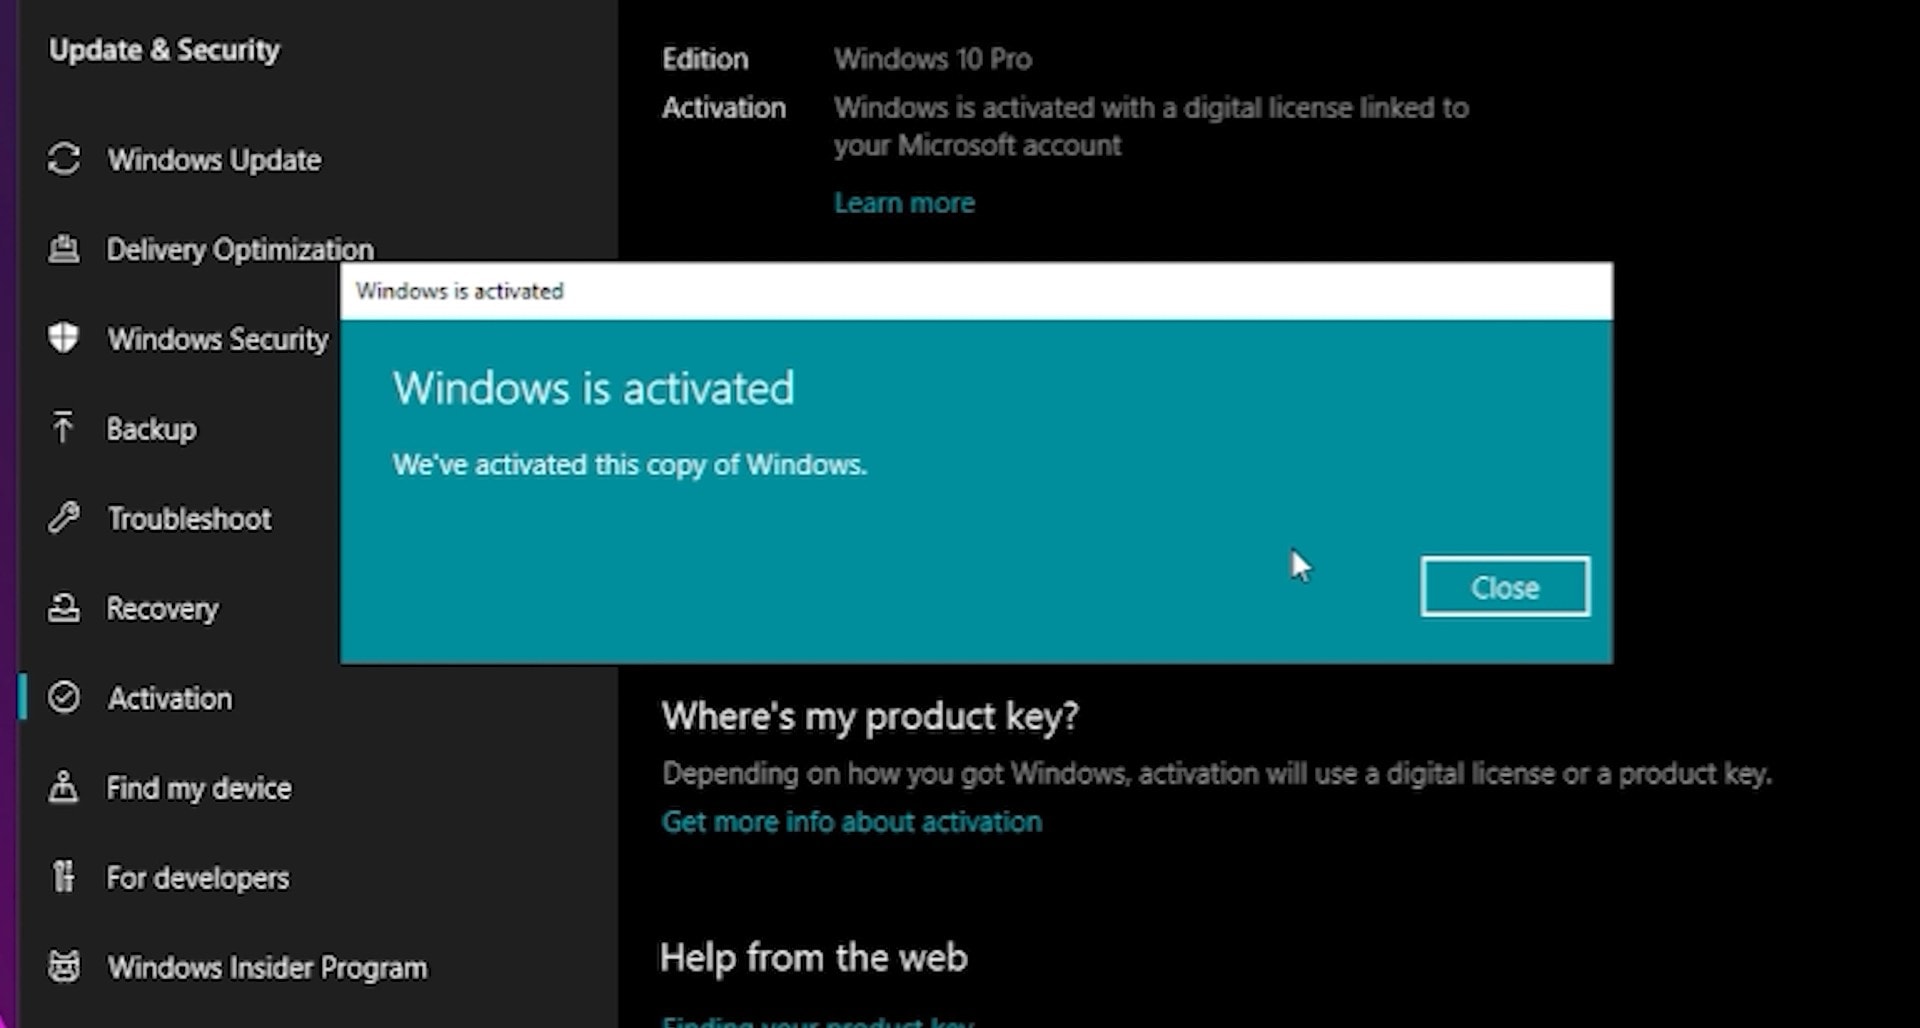 After you buy a CDKeylord.com key, activating your new Microsoft product is a straightforward process.